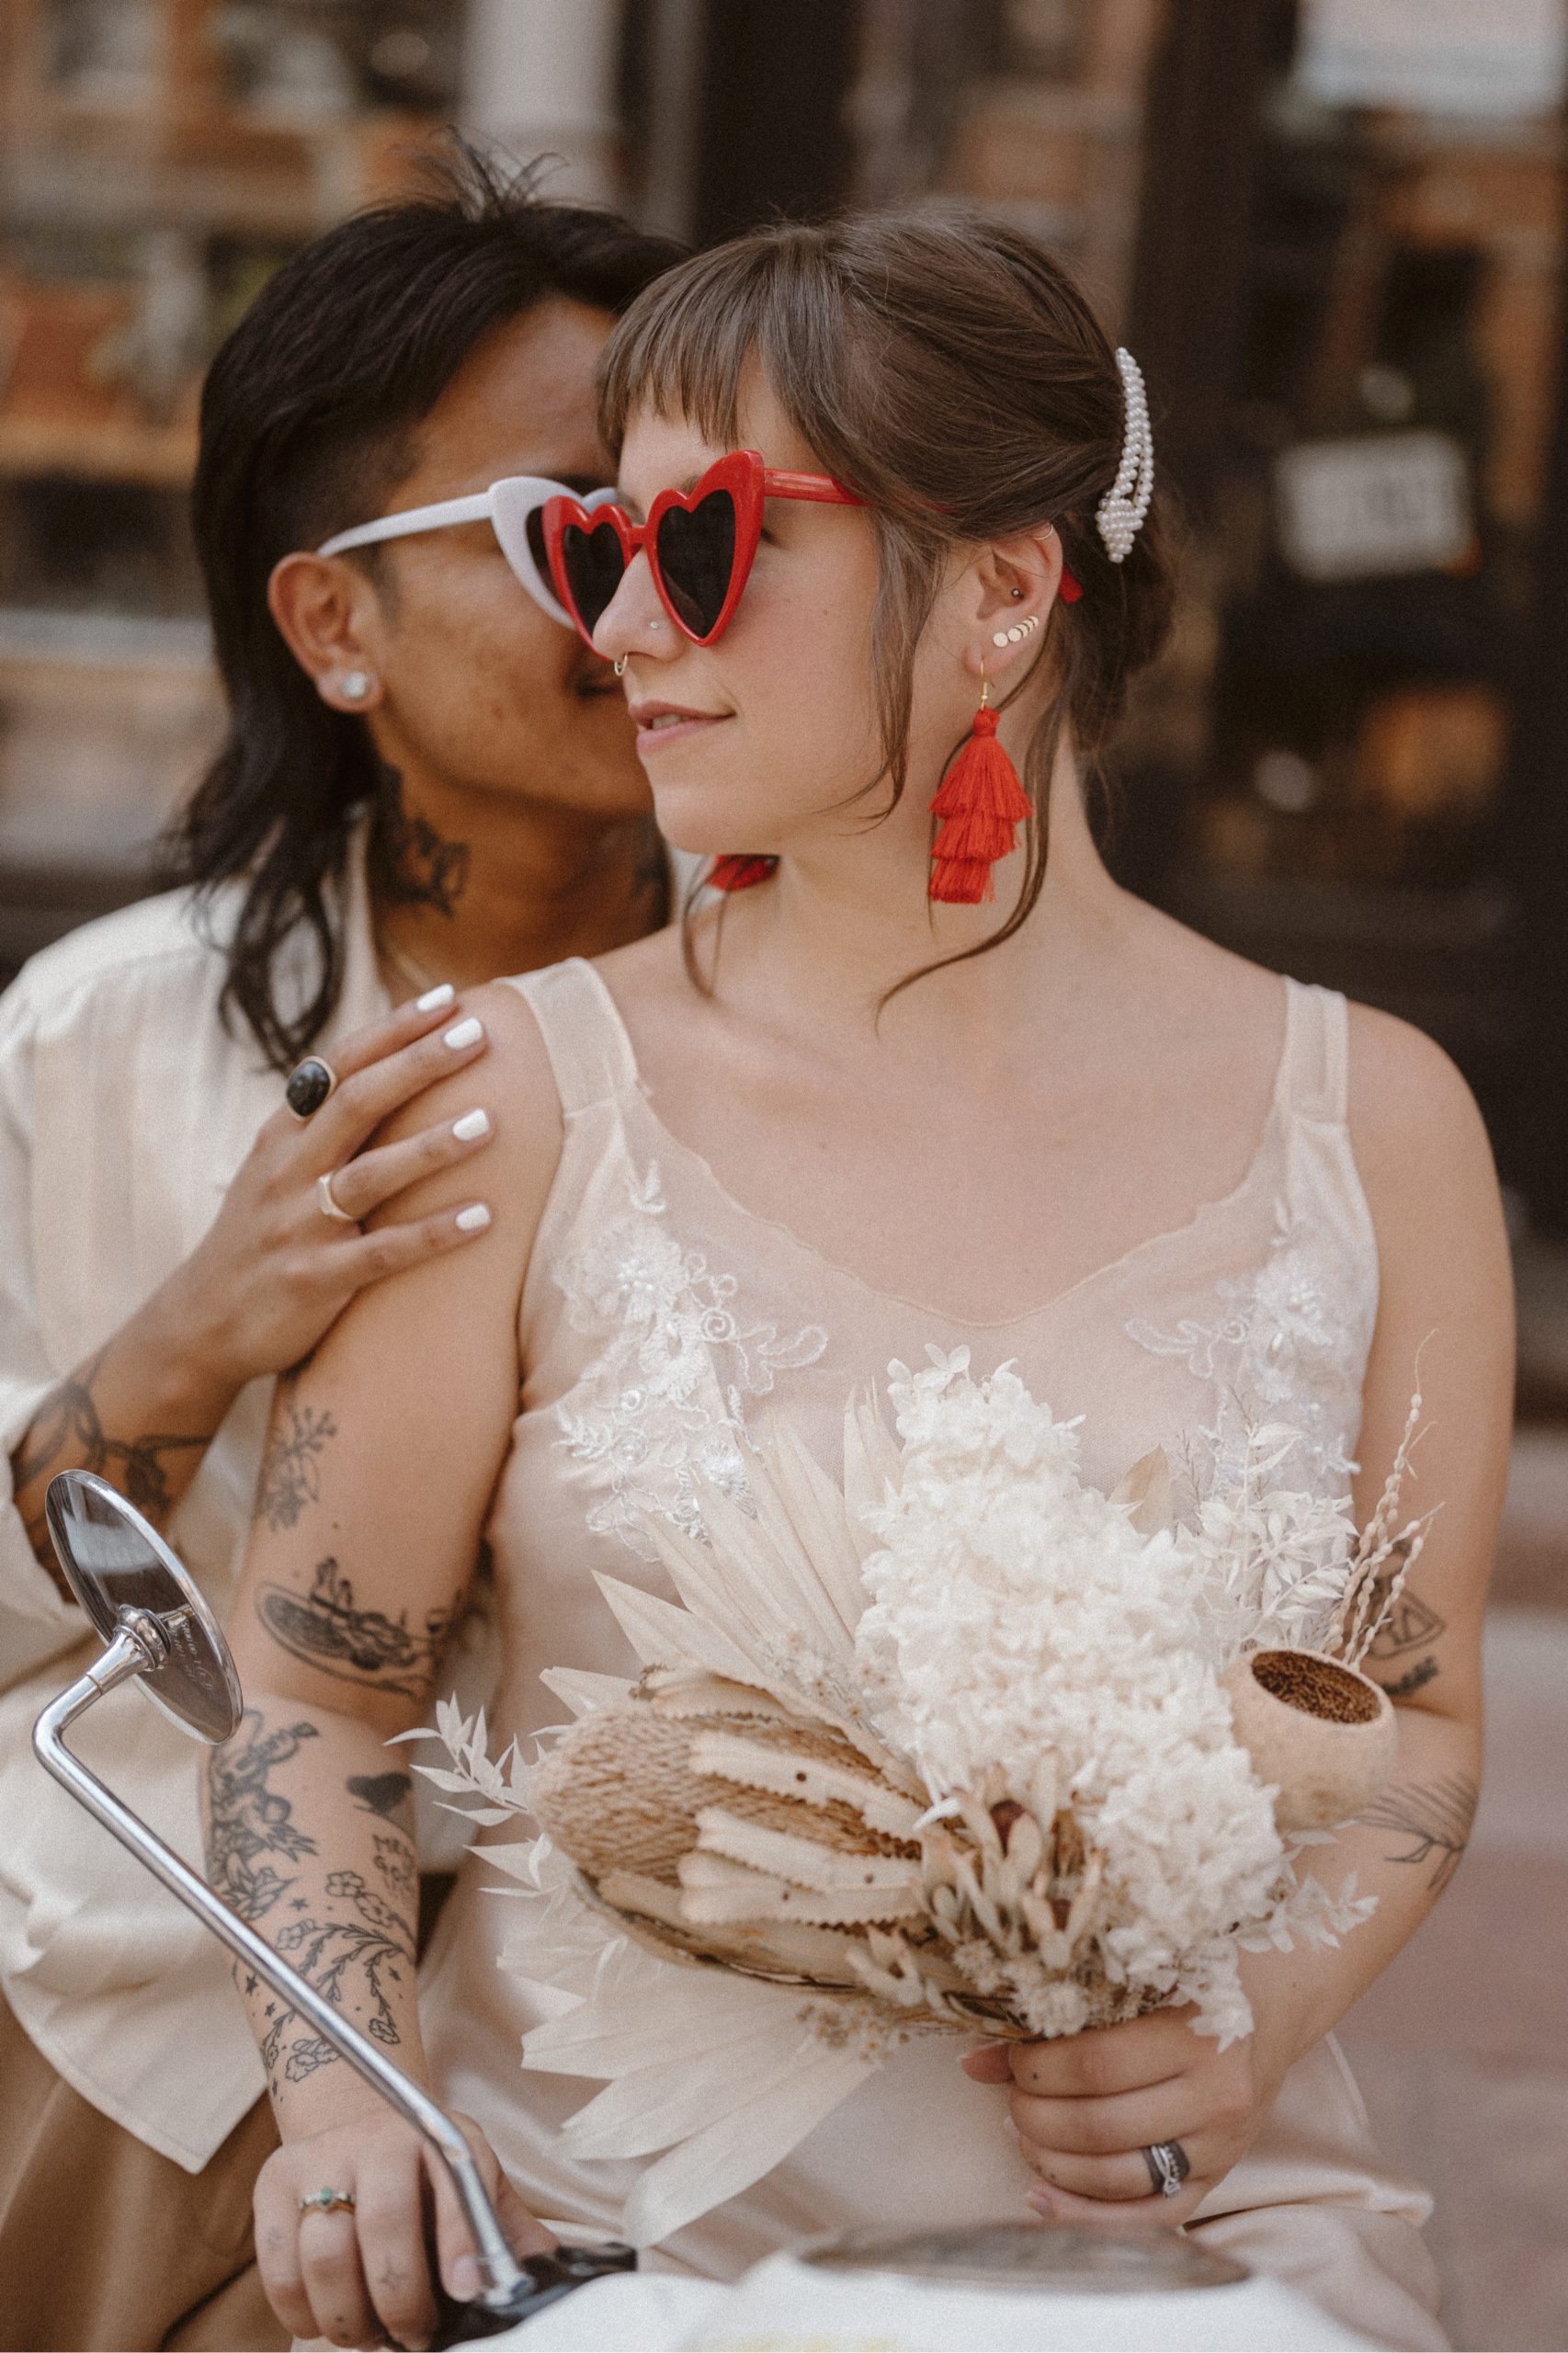 A romantic Italian-inspired downtown Denver elopement, complete with vintage outfits and an Italian scooter. Set in Larimer Square in downtown Denver.